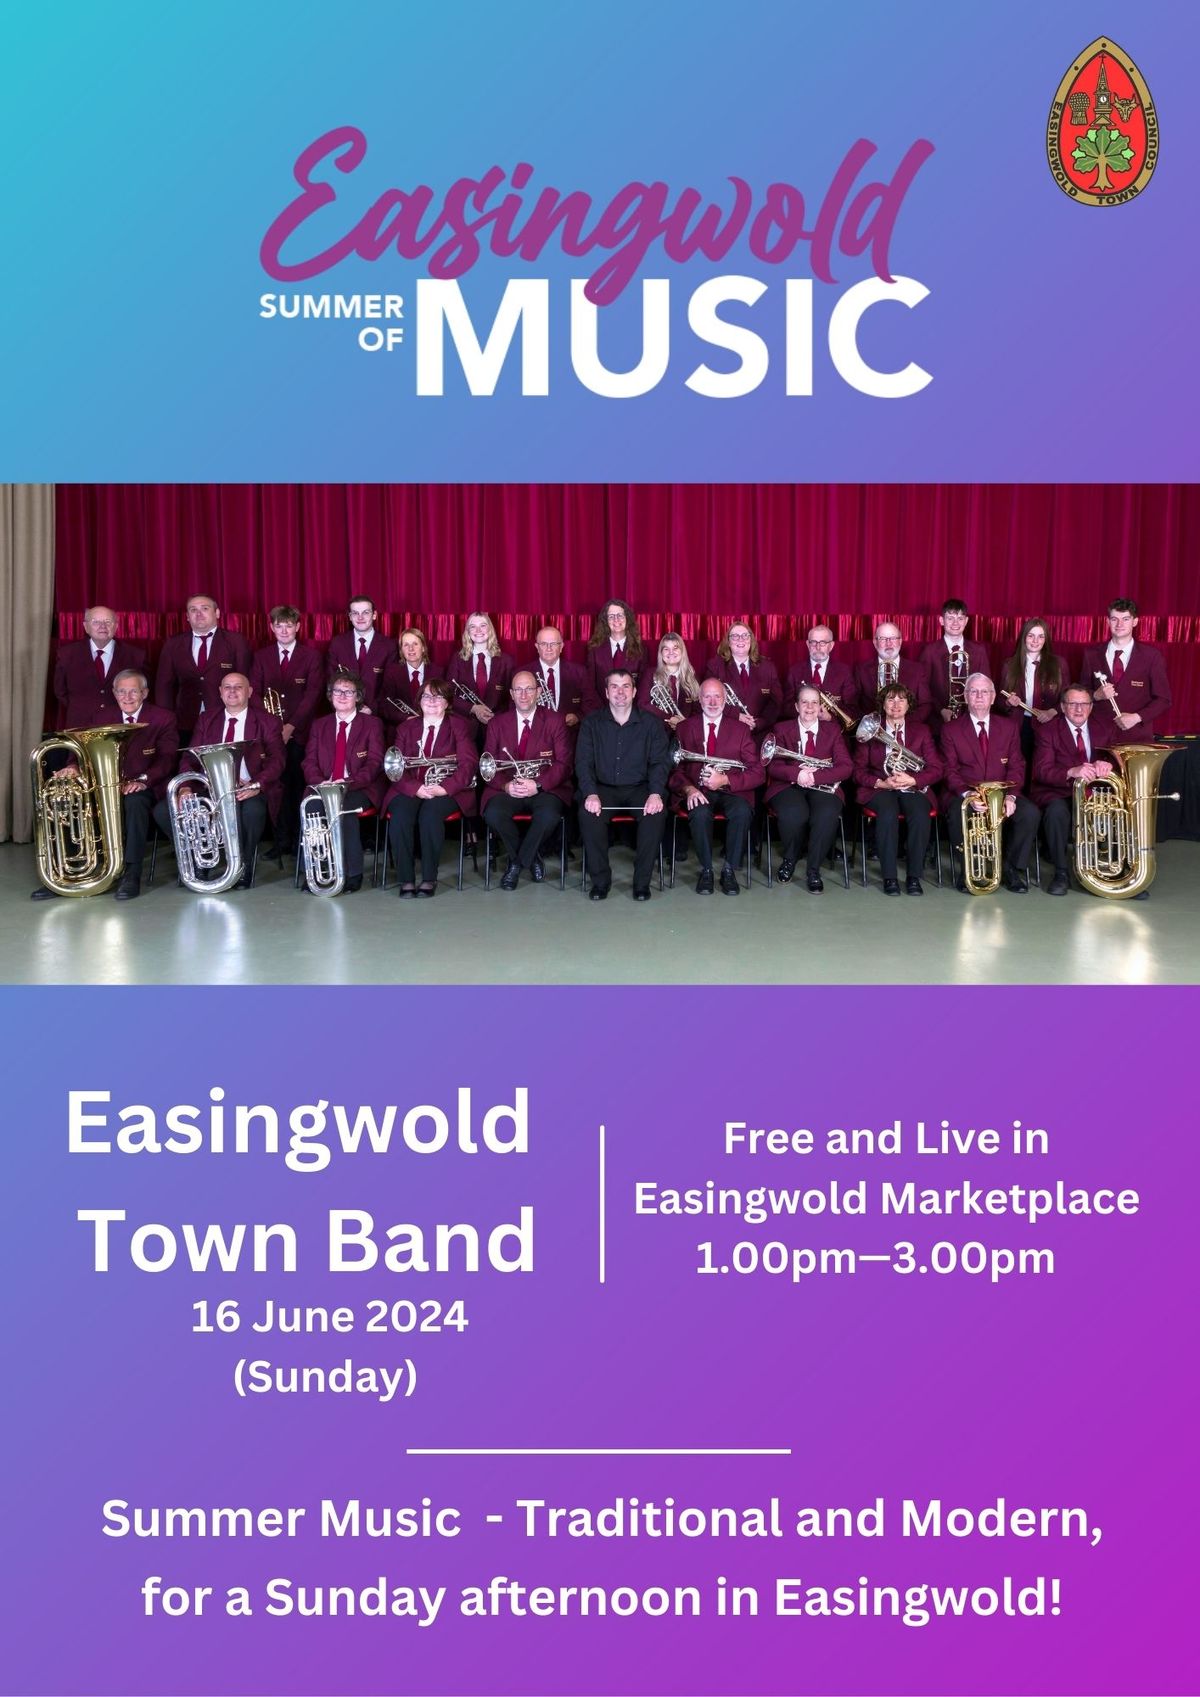 Easingwold Summer of Music - Easingwold Town Band